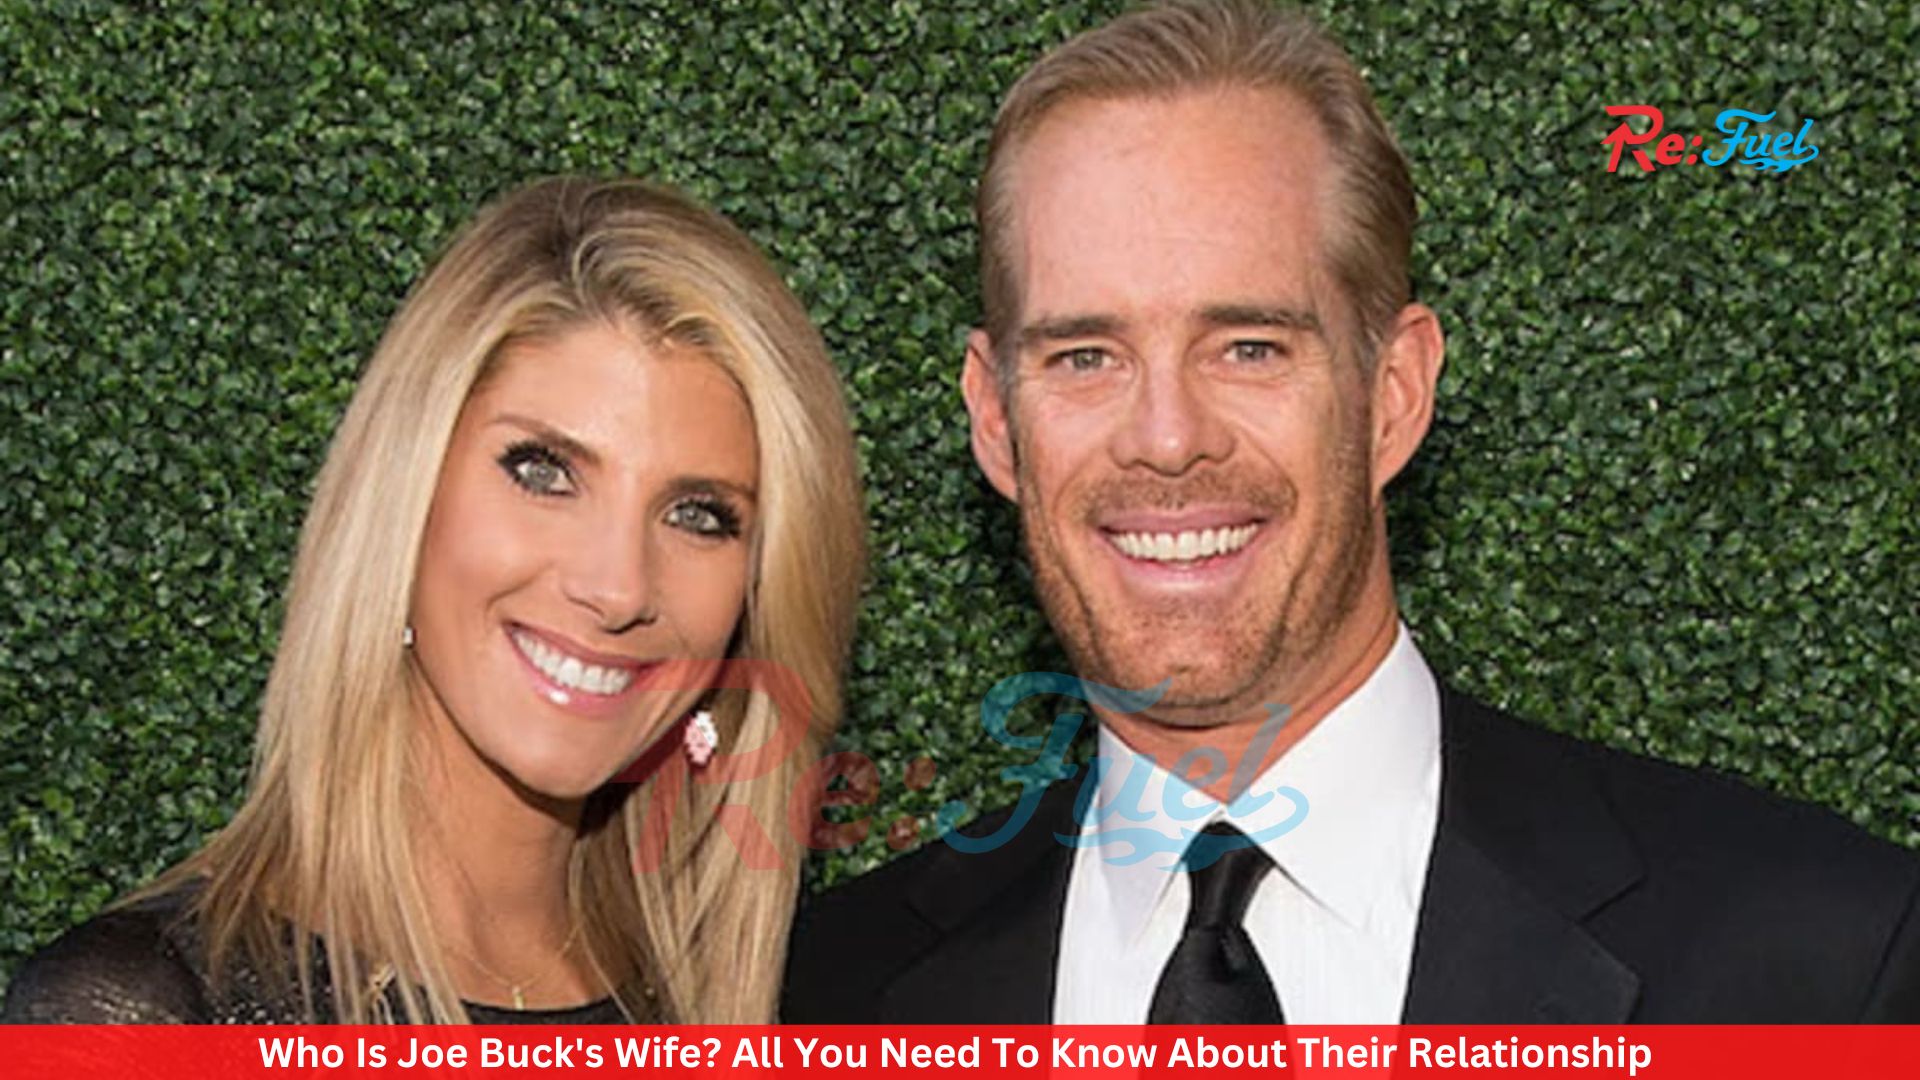 Who Is Joe Buck's Wife? All You Need To Know About Their Relationship